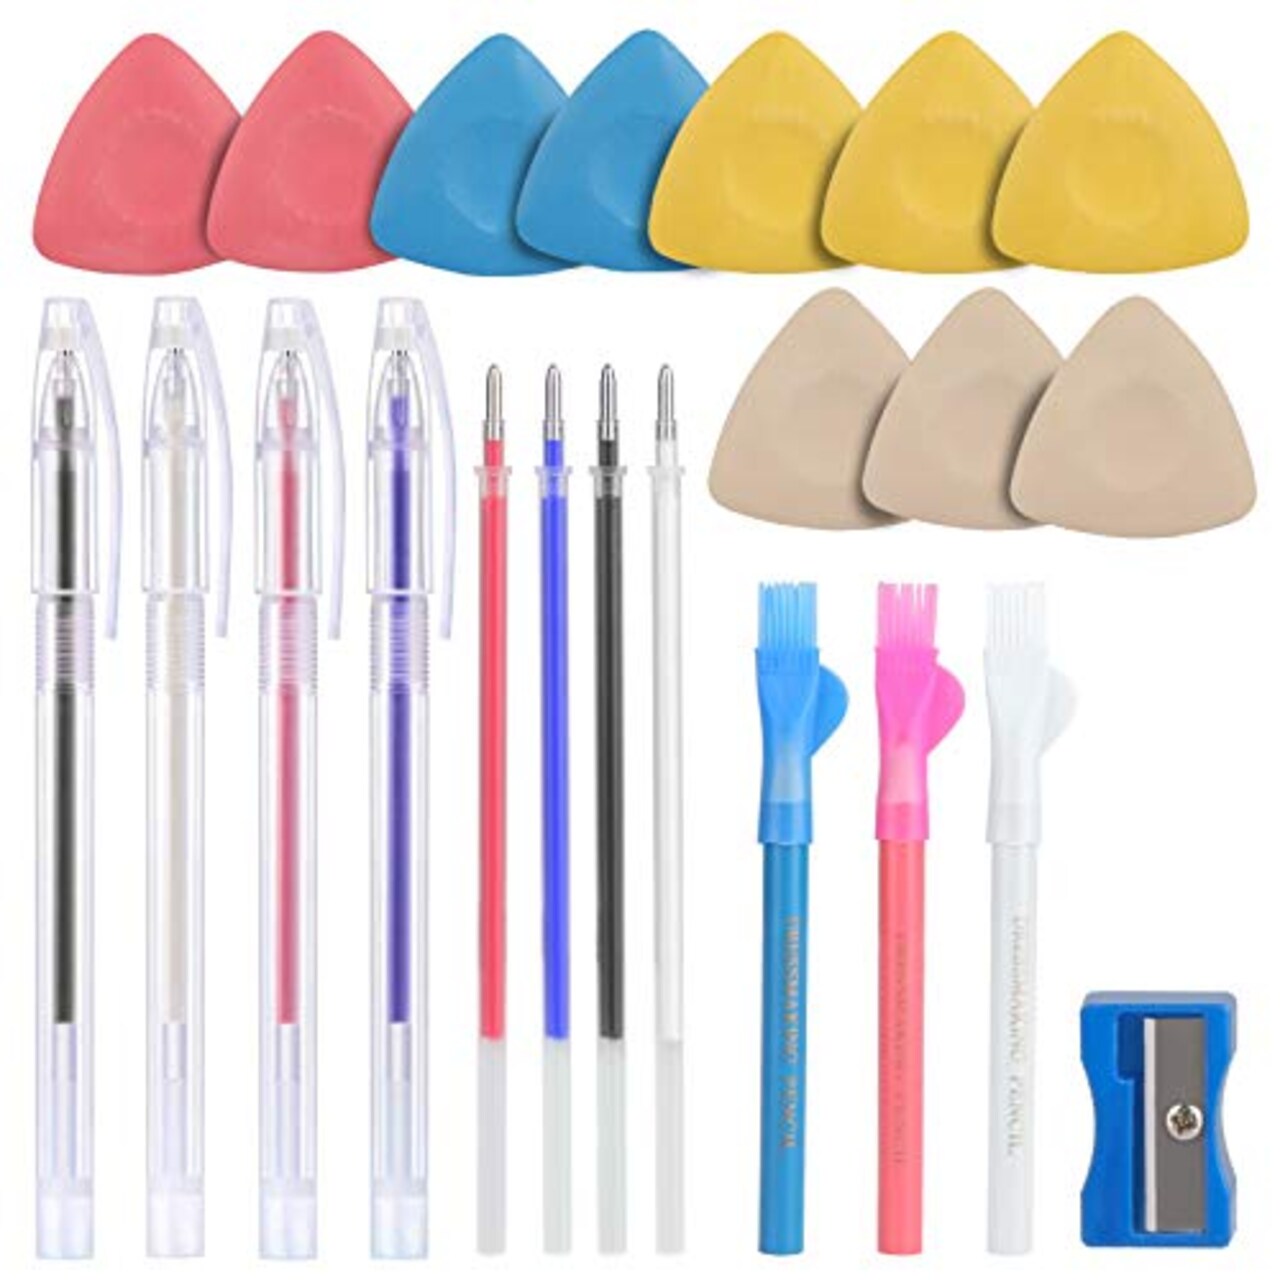 Tailors Chalk,Sewing Fabric Chalk and Fabric Markers for Quilting,10PCS  Tailor's Chalk,4PCS Heat Erasable Fabric Marking Pens with 4 Refills,3 PCS  Sewing Fabric Pencils